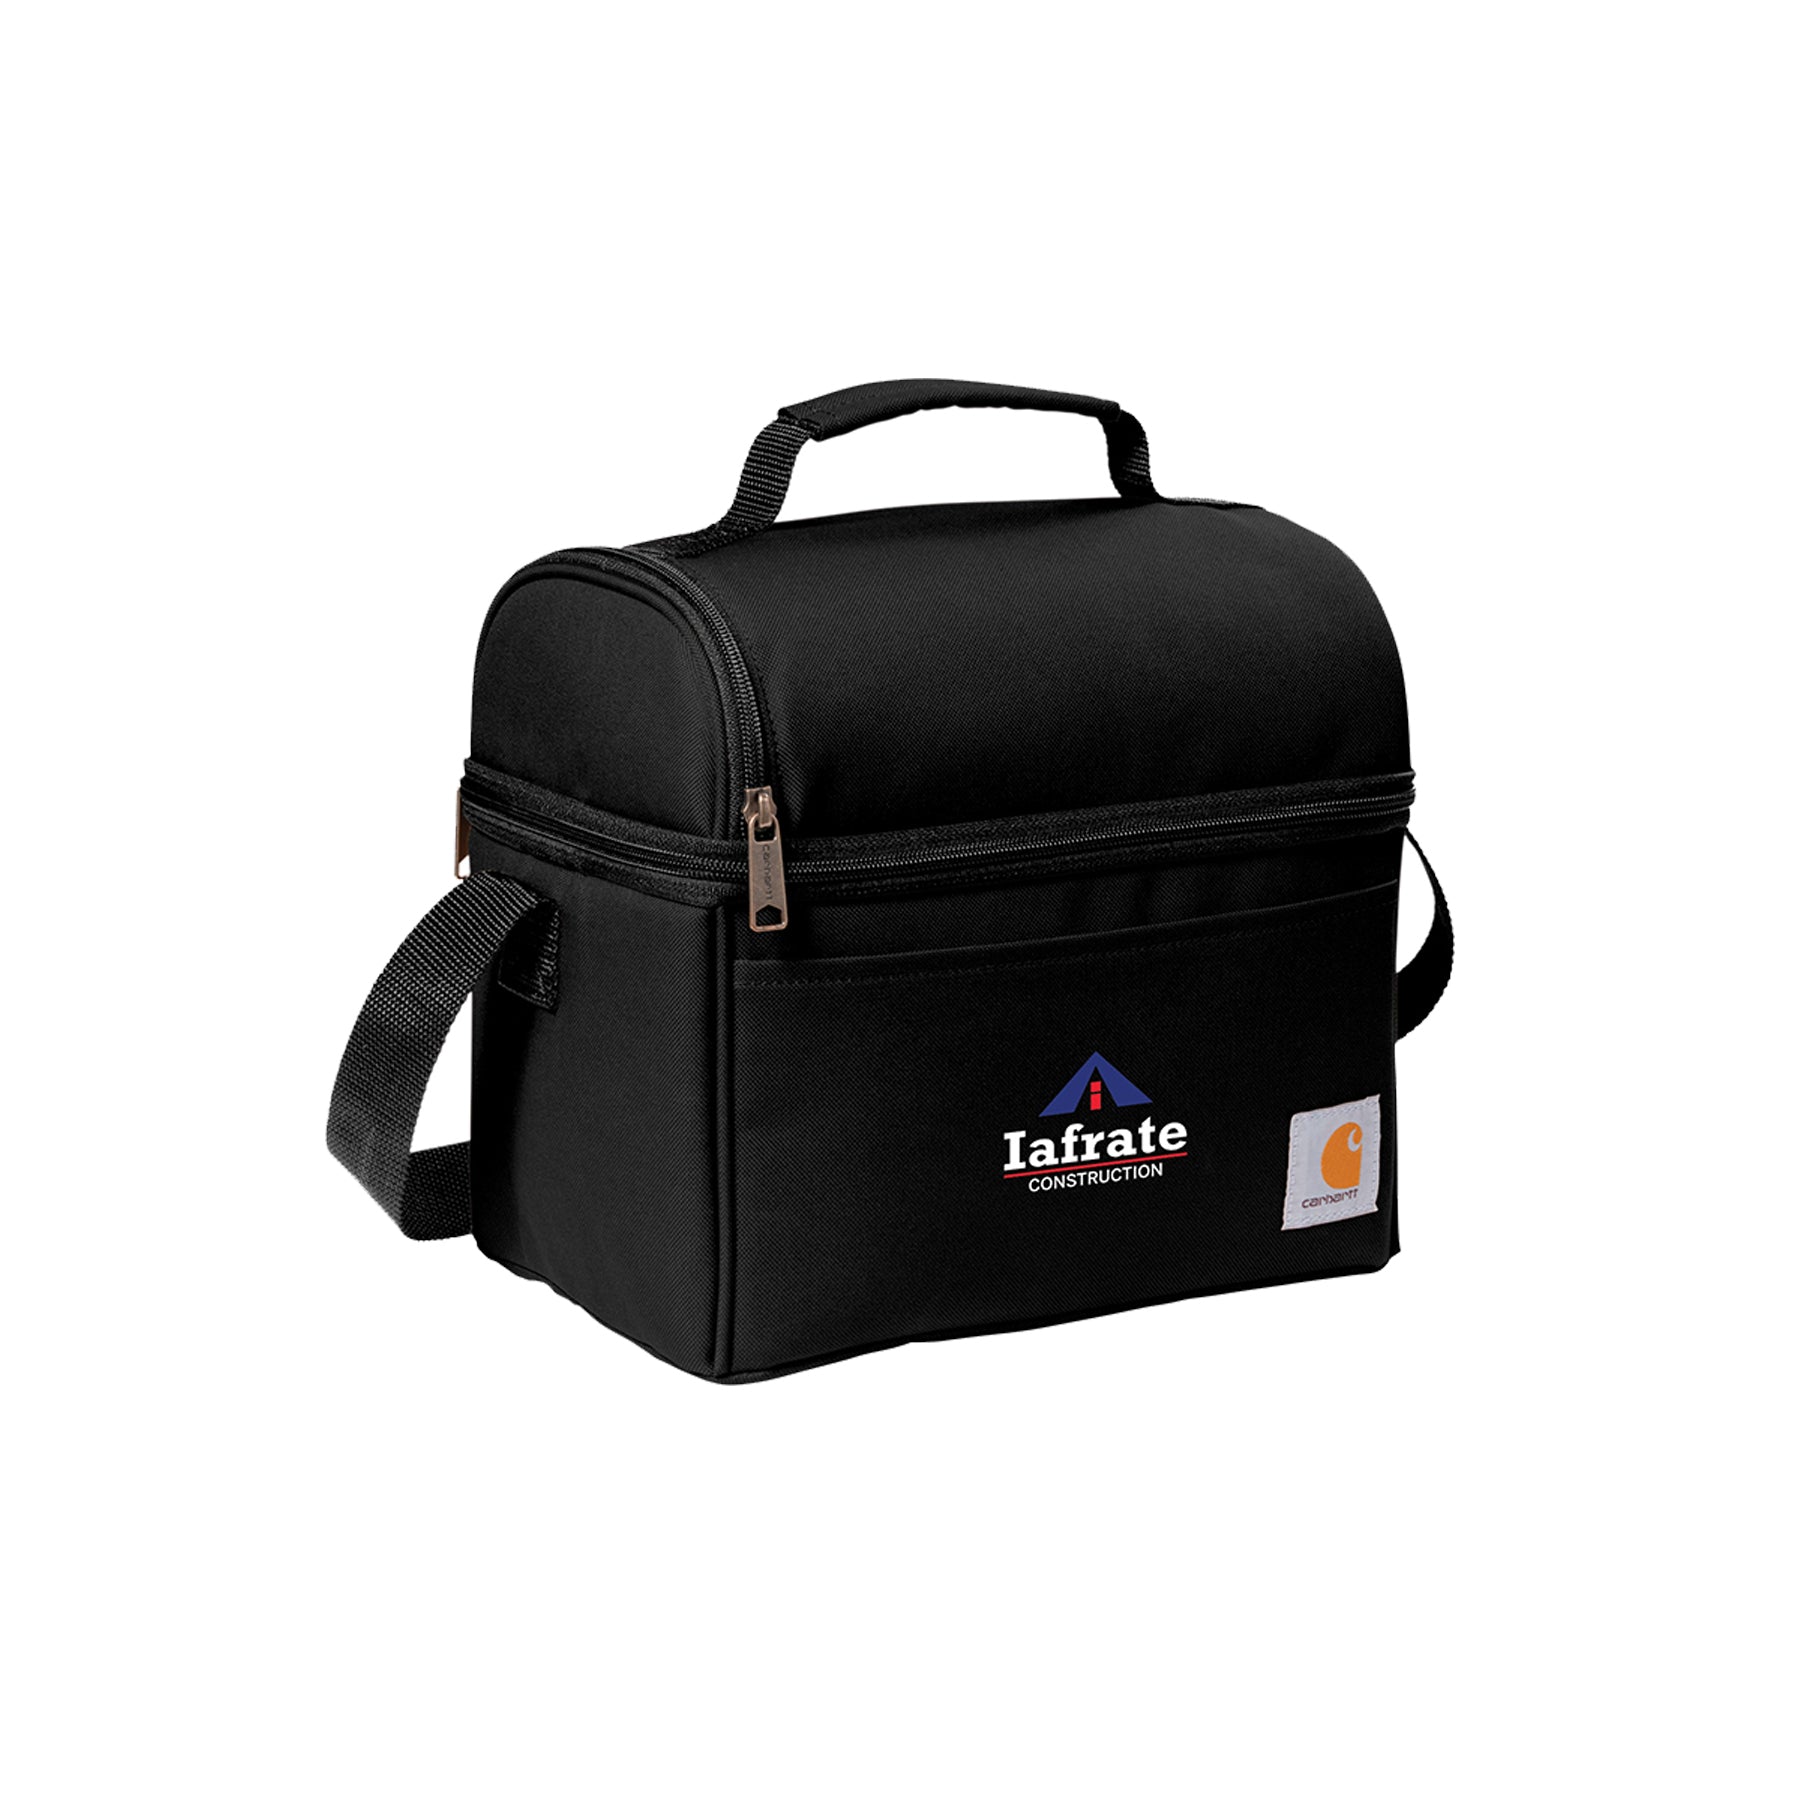 Carhartt - Lunch 6-Can Cooler. CT89251601.